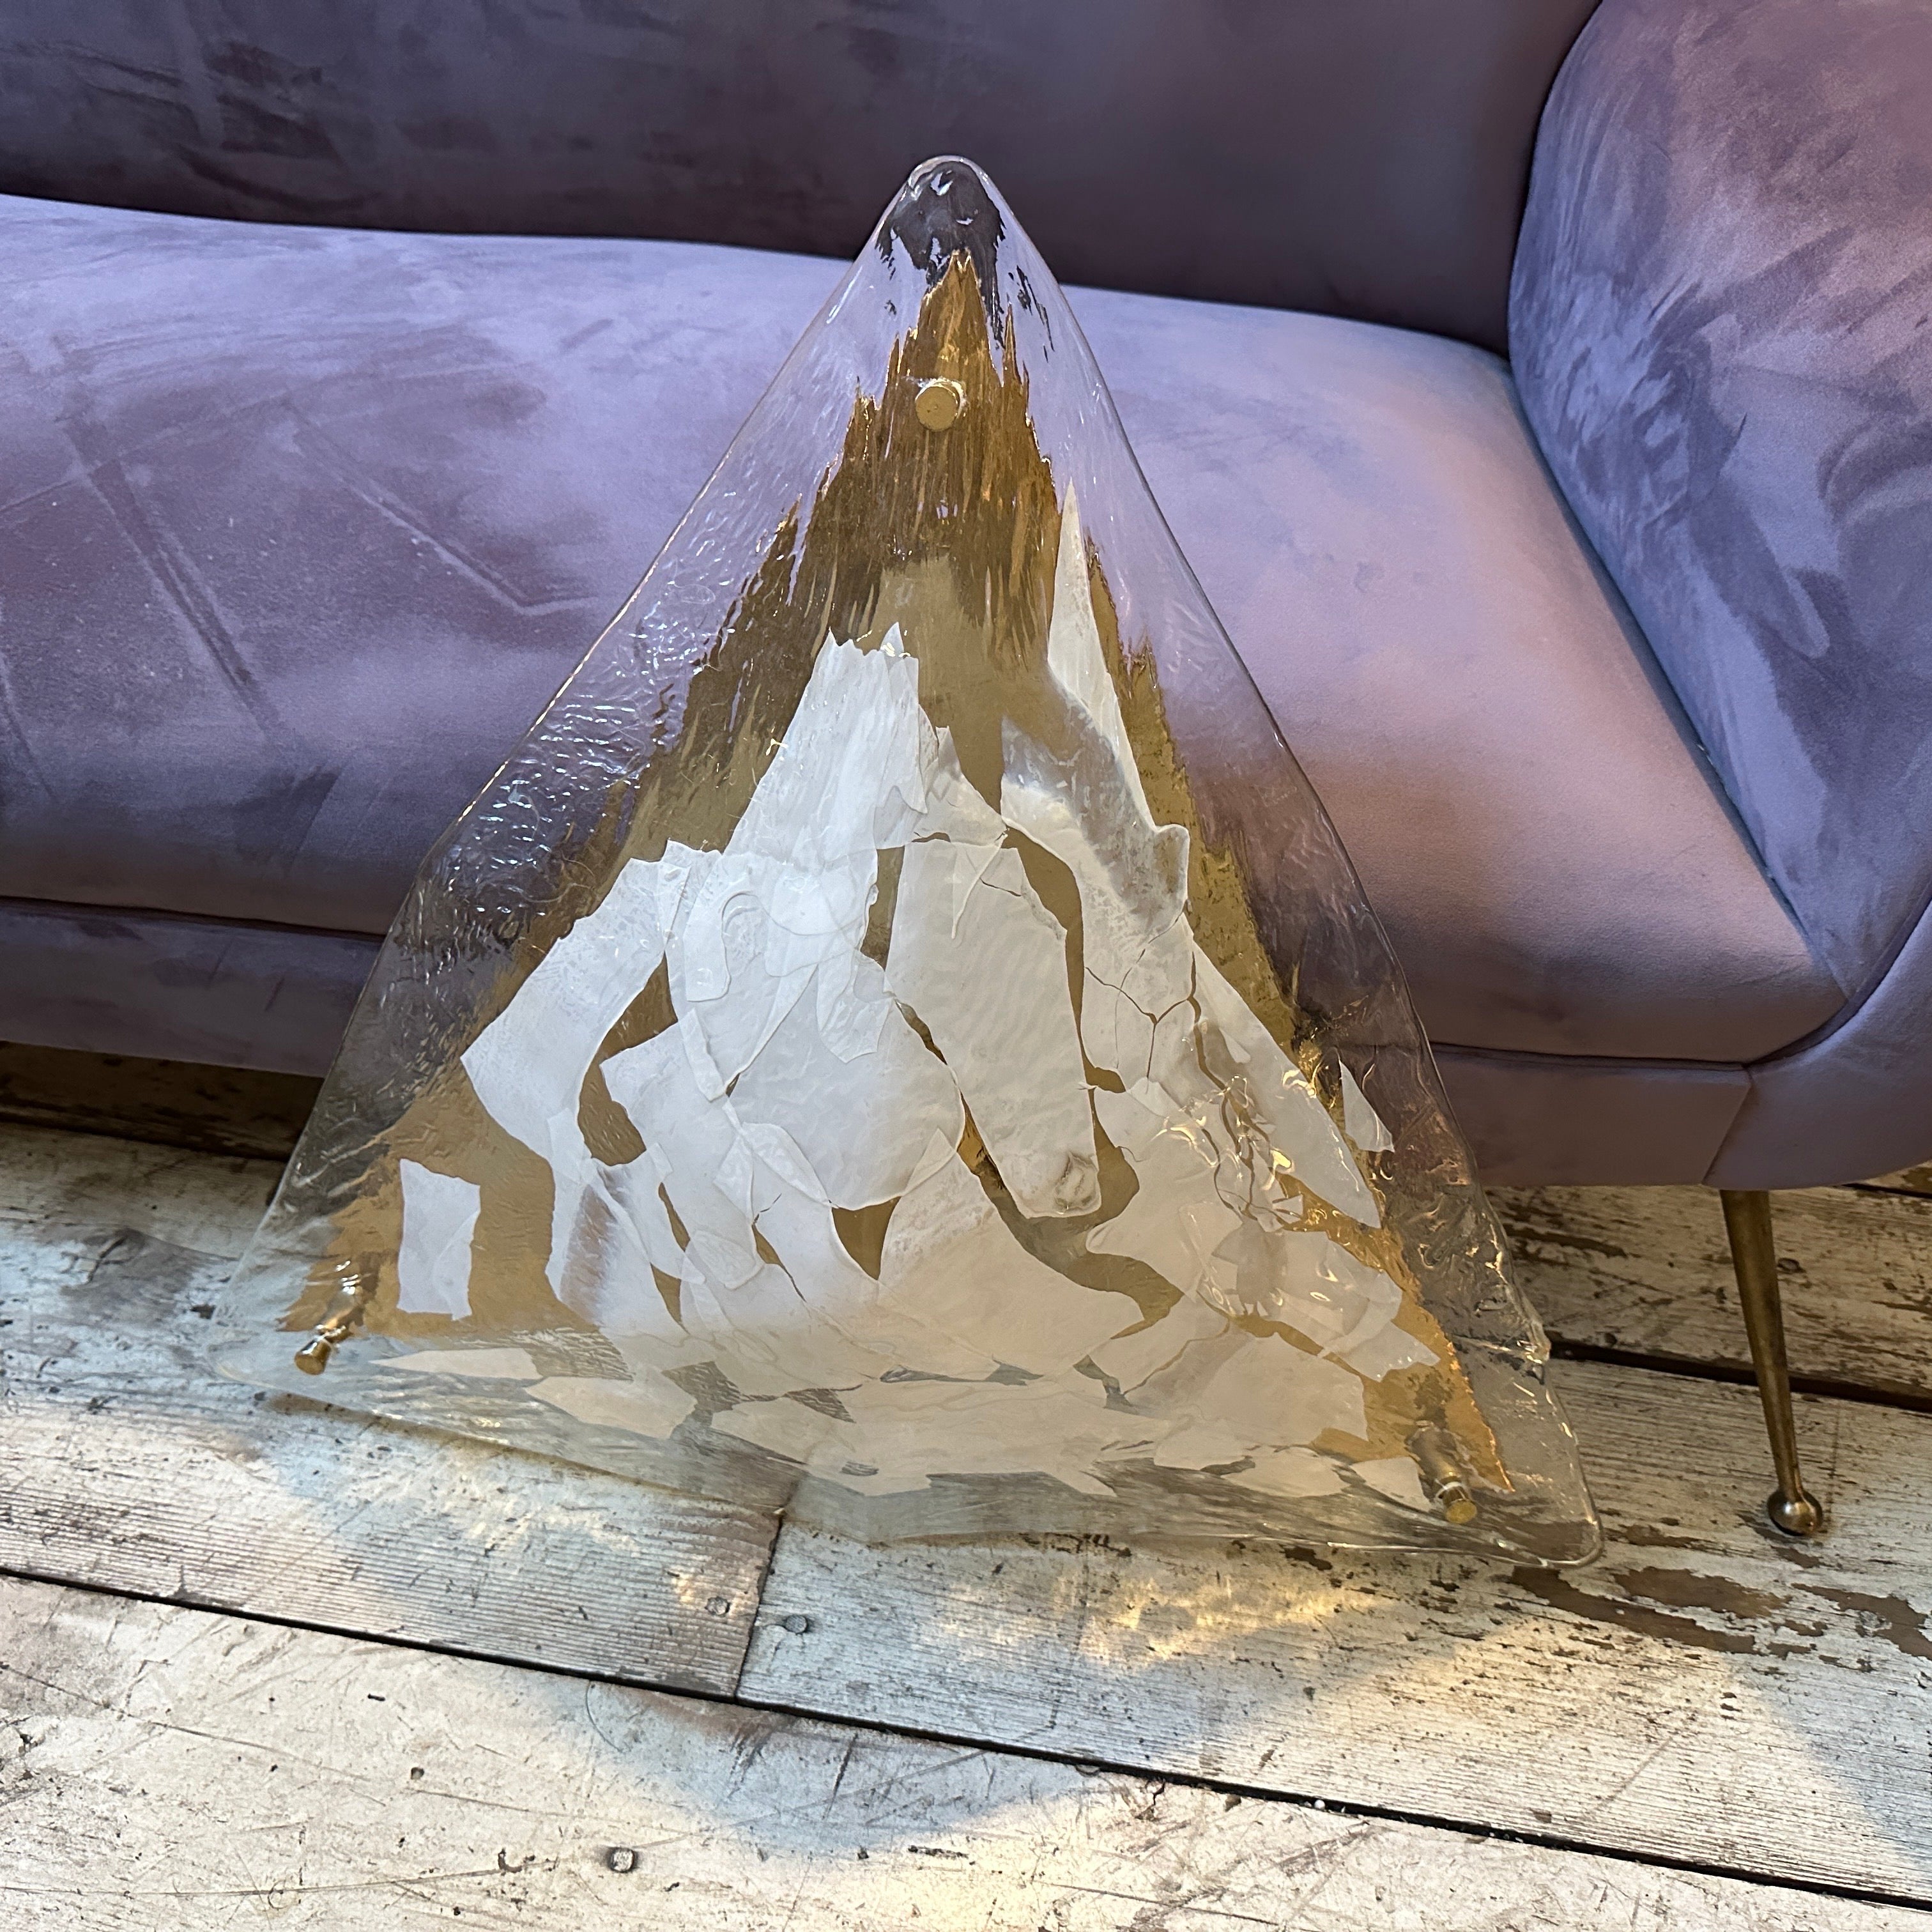 A triangular ceiling light designed and manufactured in Venice in the Seventies by La Murrina, it's In working order and in very good condition overall. This is a stunning piece that embodies the essence of sleek design and refined craftsmanship.